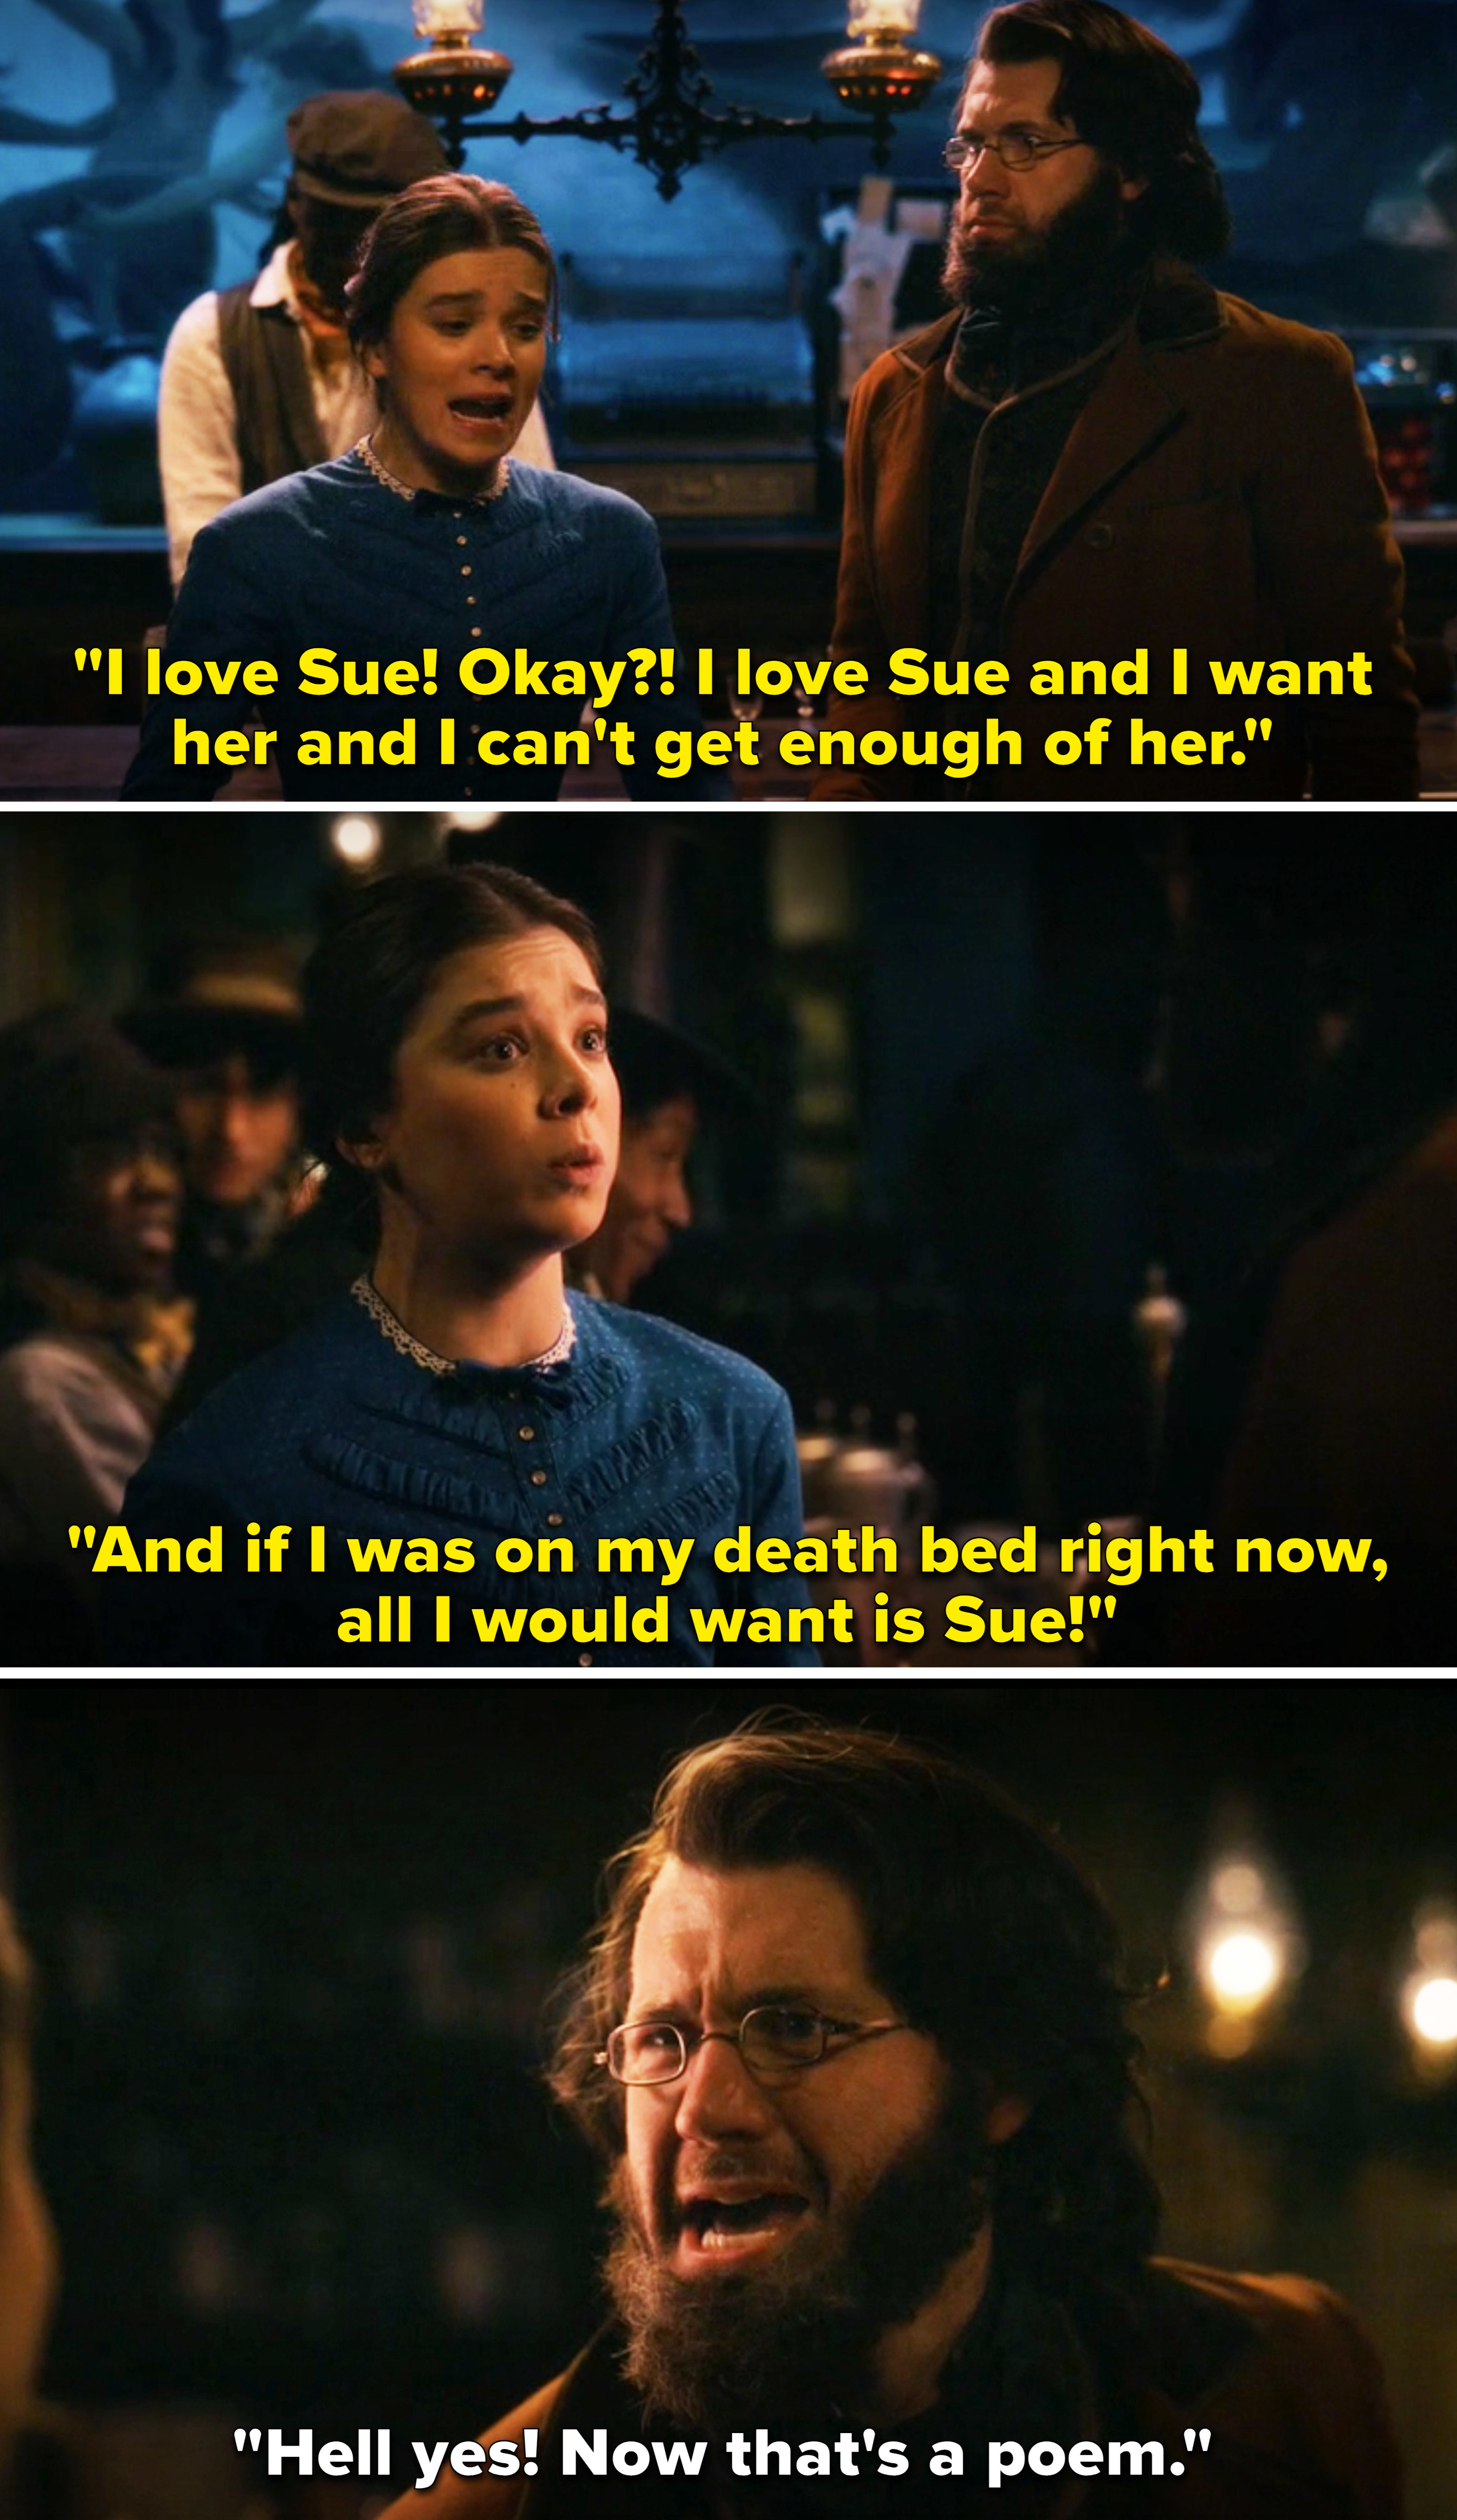 Emily screaming, &quot;I love Sue. And if I was on my death bed right now, all I would want is Sue&quot;